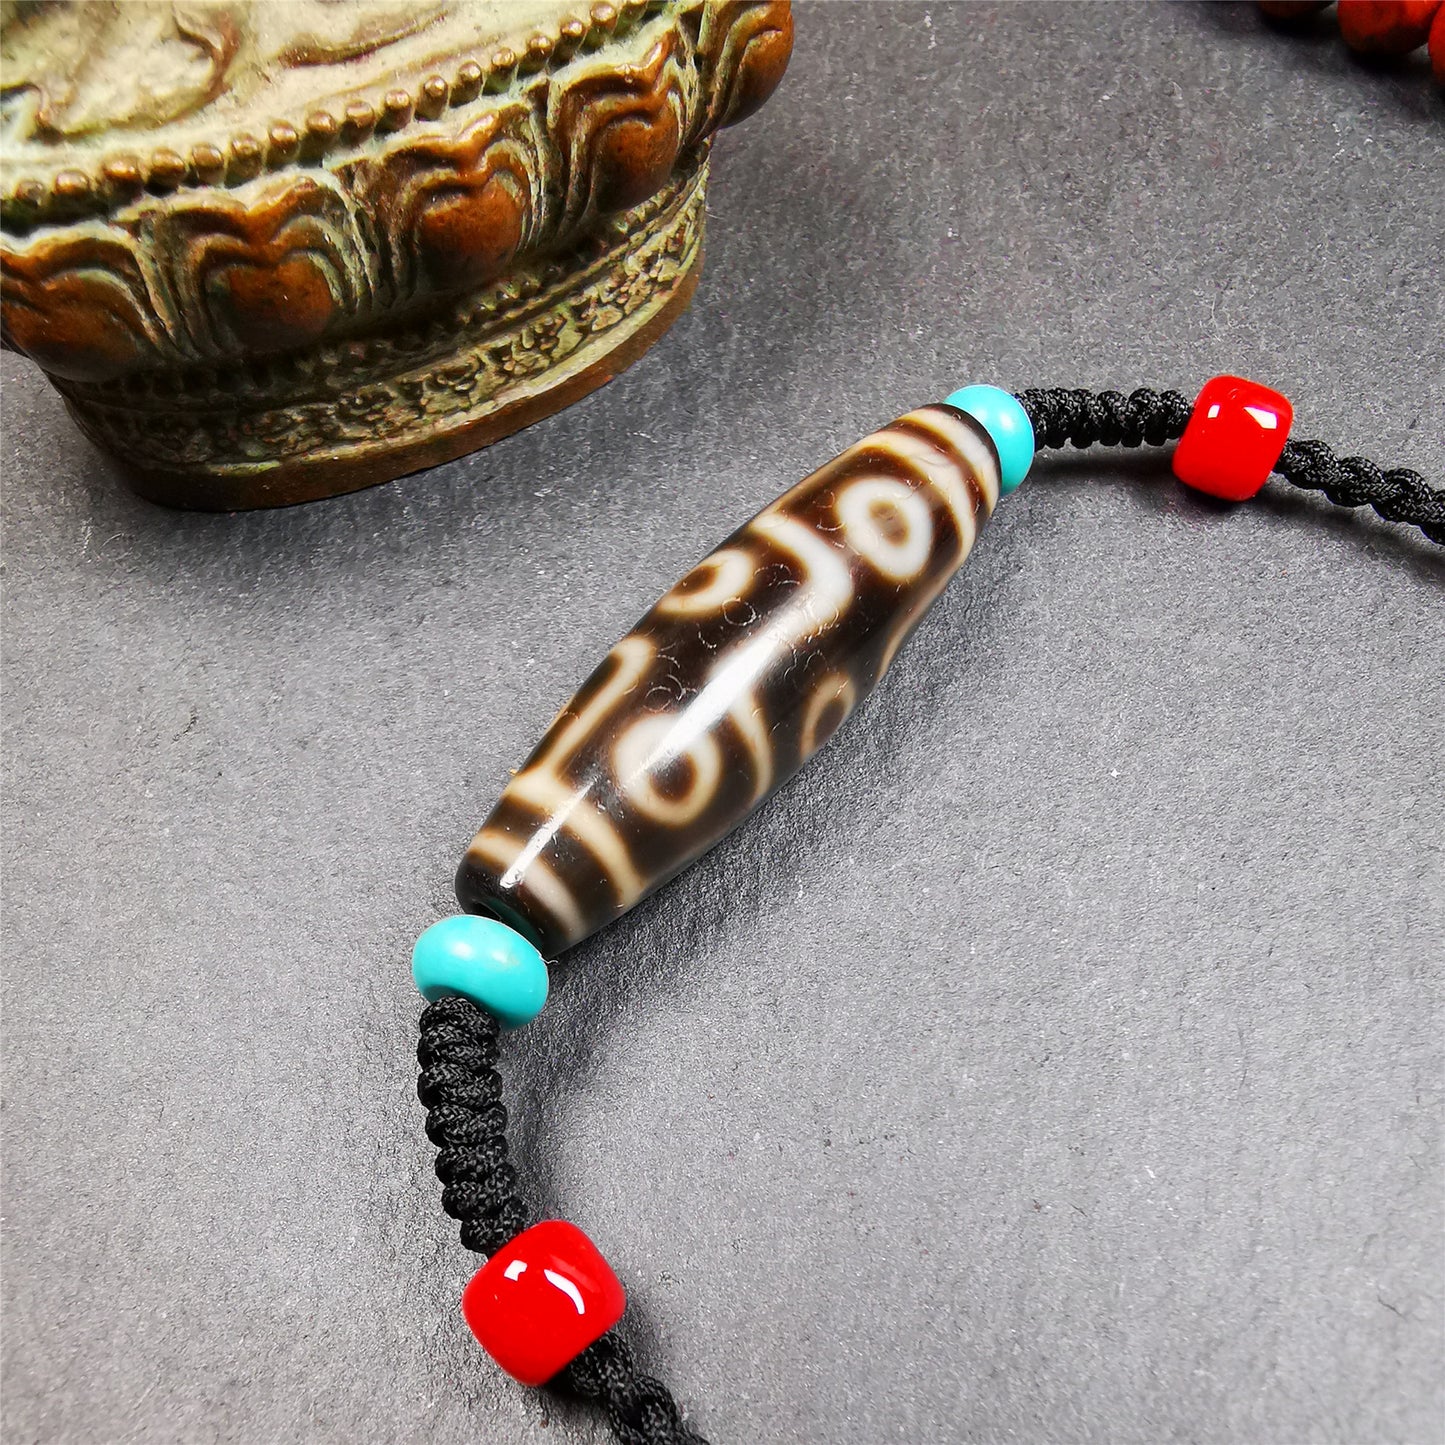 This 9 eyes dzi bead was collected from gerze Tibet,about 40 years old. The necklace was hand-woven by Tibetans from Baiyu County, the main bead is a brown color 9 eyes dzi, paired with 2 turquoise beads and 2 red agate beads.